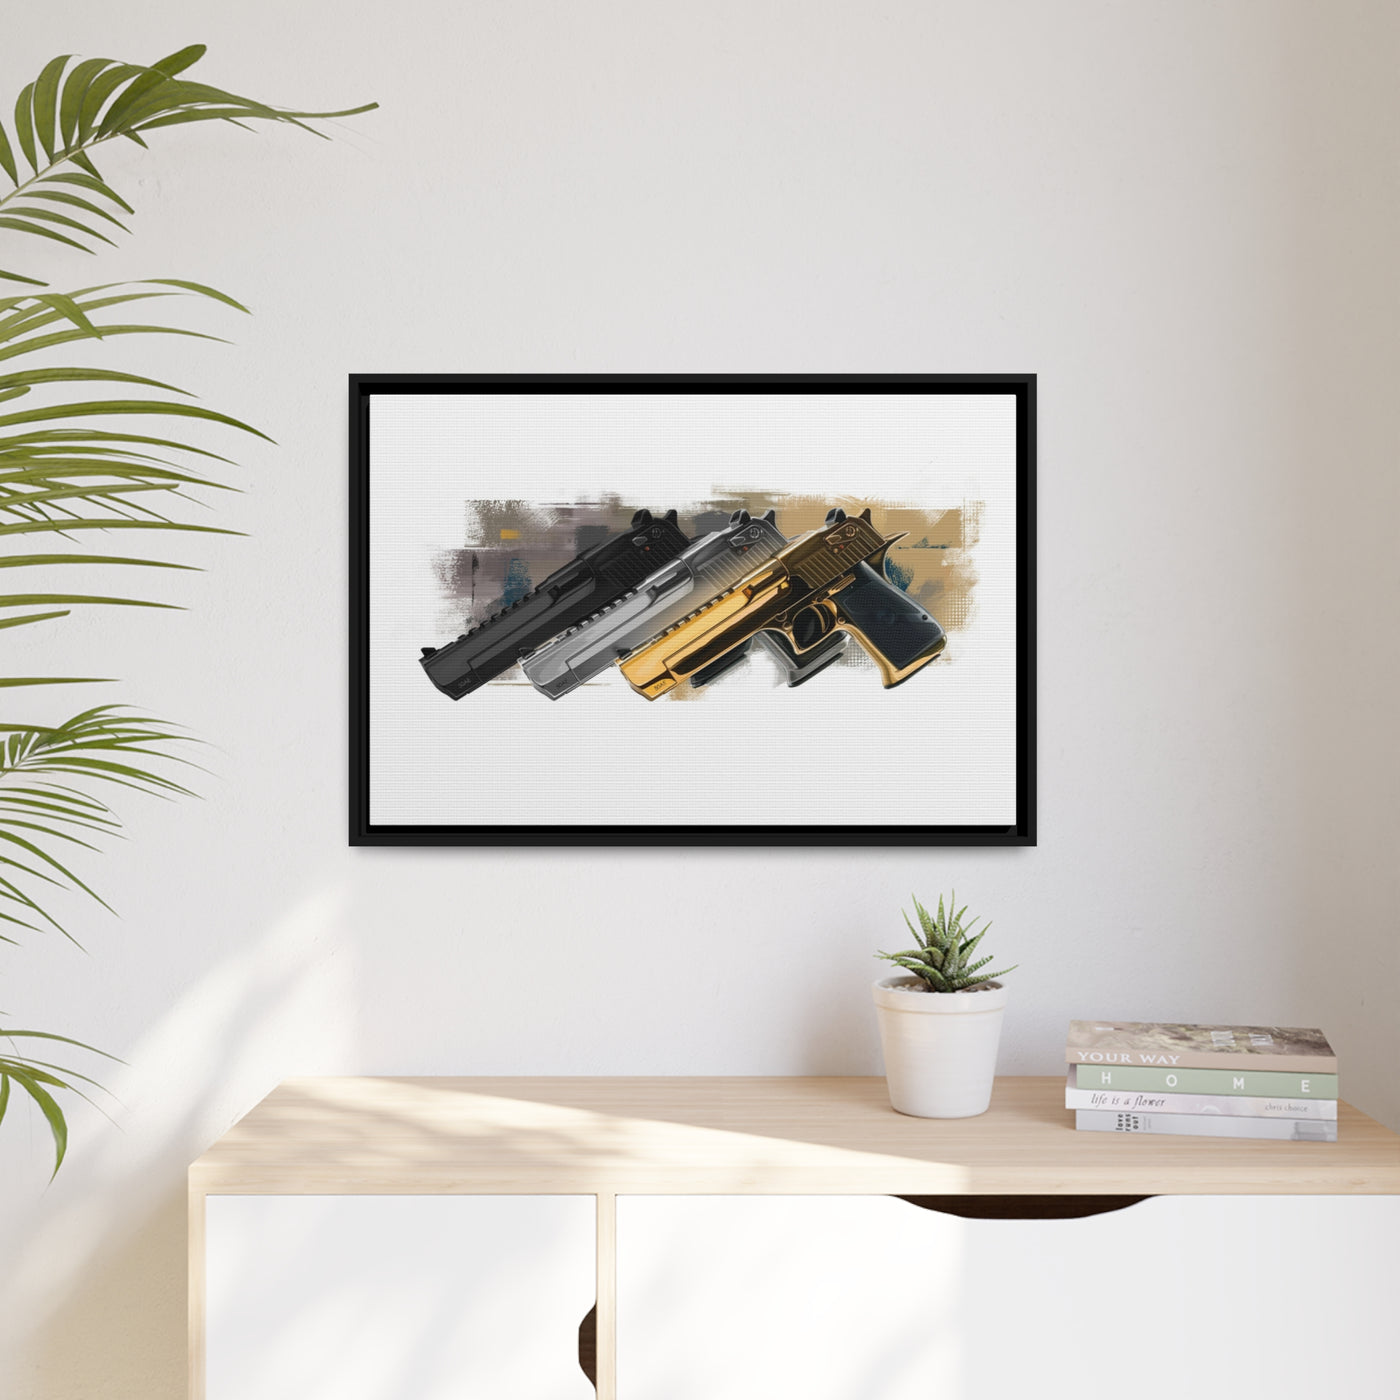 Super Power Pistol Trio - Black Framed Wrapped Canvas - Value Collection